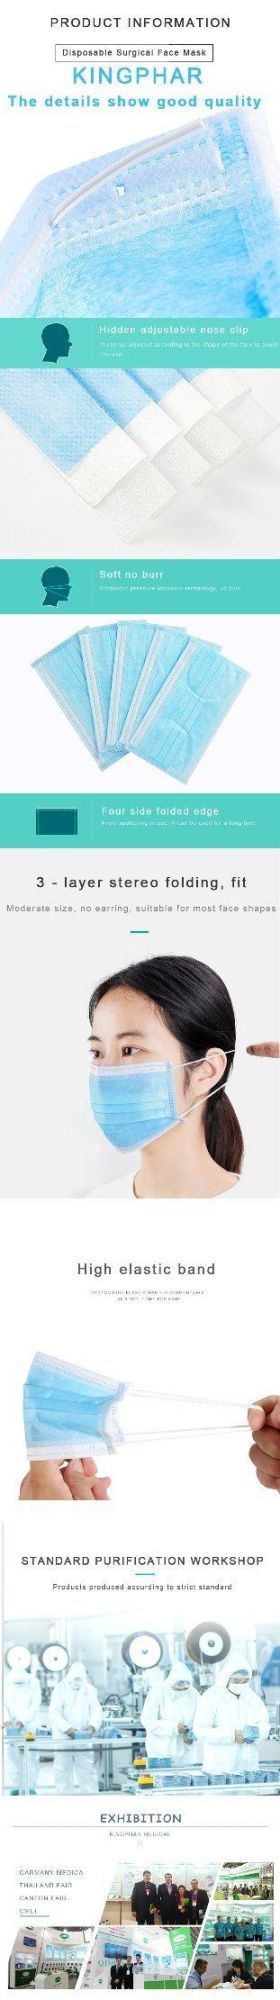 Wholesale 3 Ply/ 3 Layer Disposable Non Woven Nonwoven Fabric Anti-Dust PPE Mascarillas Respirator Protective Safety Earloop Face Mask